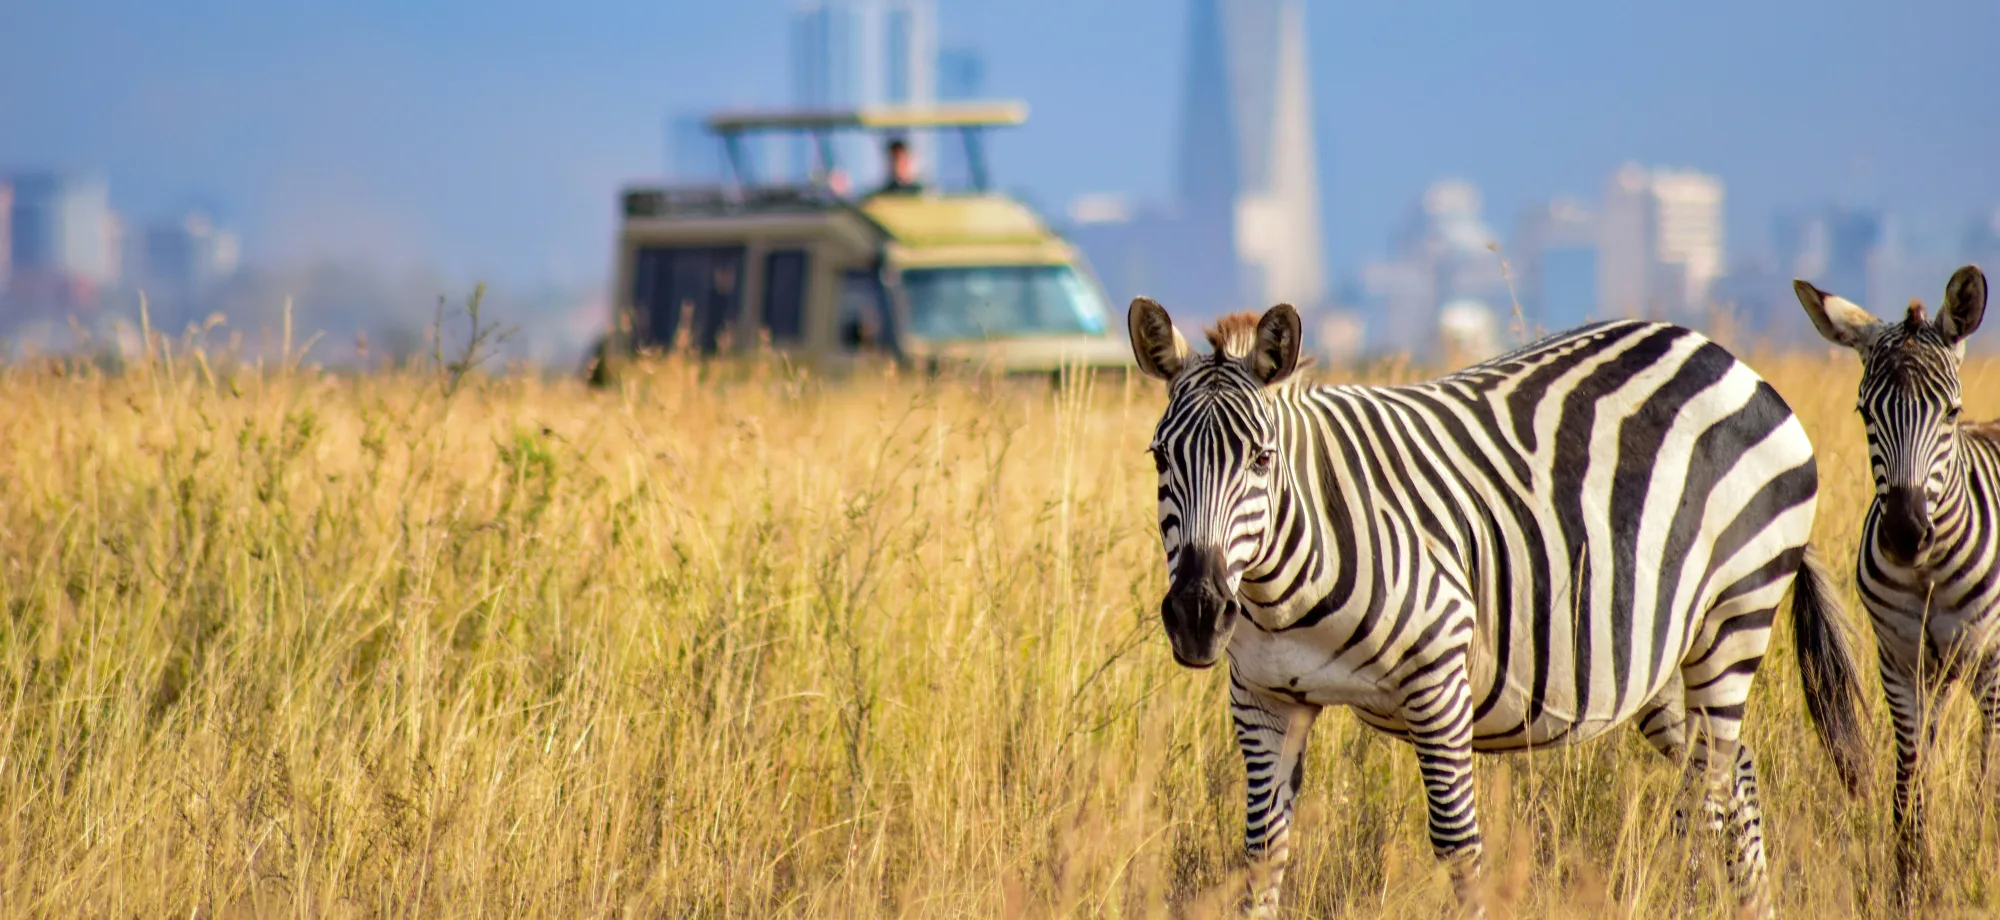 A safari vehicle with passengers is looking at two zebra in Kenya.